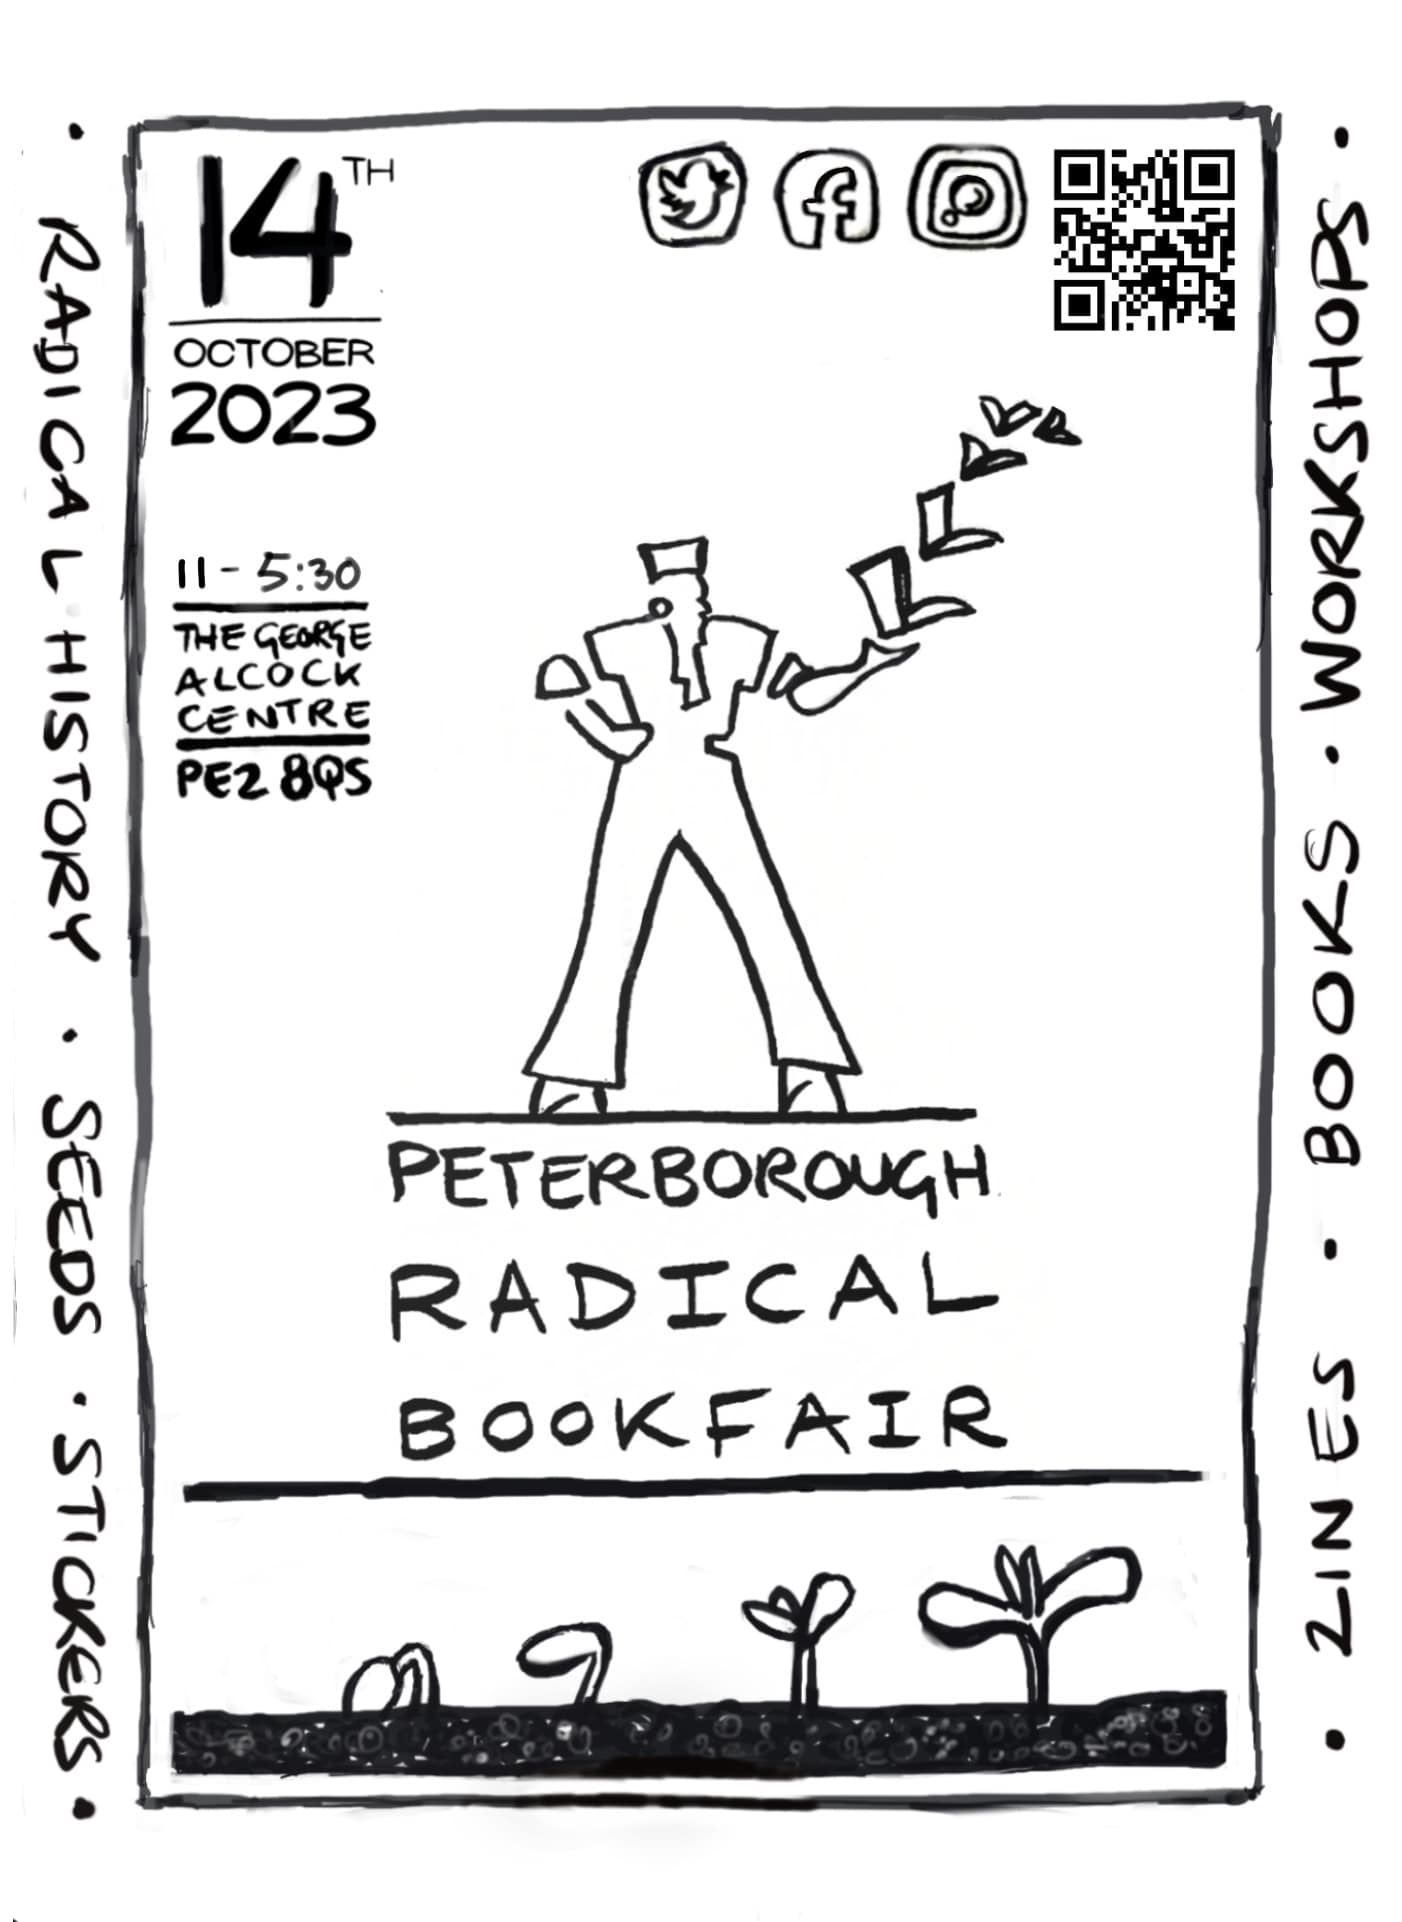 Peterborough Radical Bookfair. Saturday 14th October 2023, 11am to 5.30pm at the George Alcock Centre, Whittlesey Rd, Stanground, Peterborough PE2 8QS.